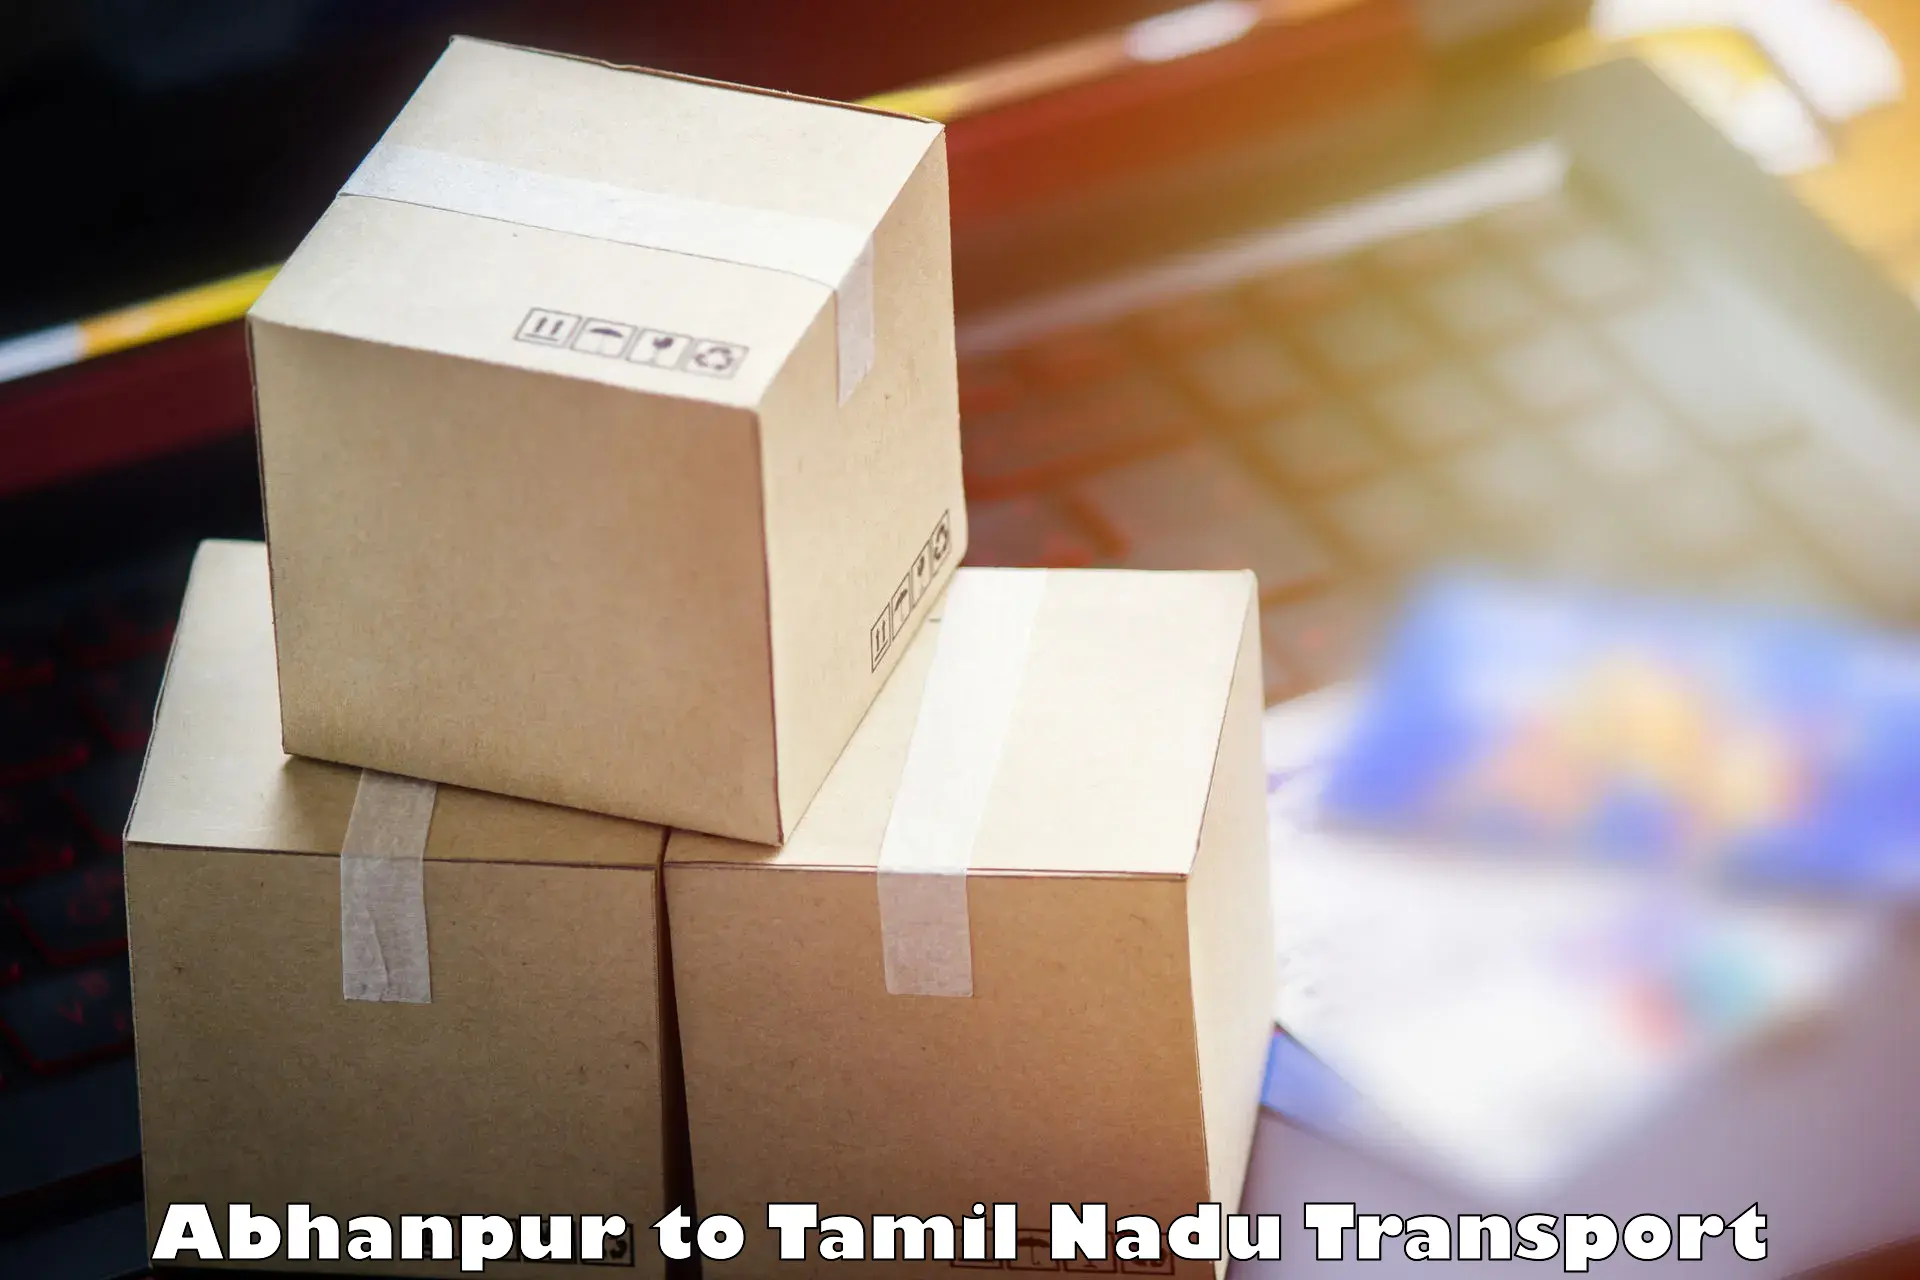 Parcel transport services Abhanpur to Thanjavur